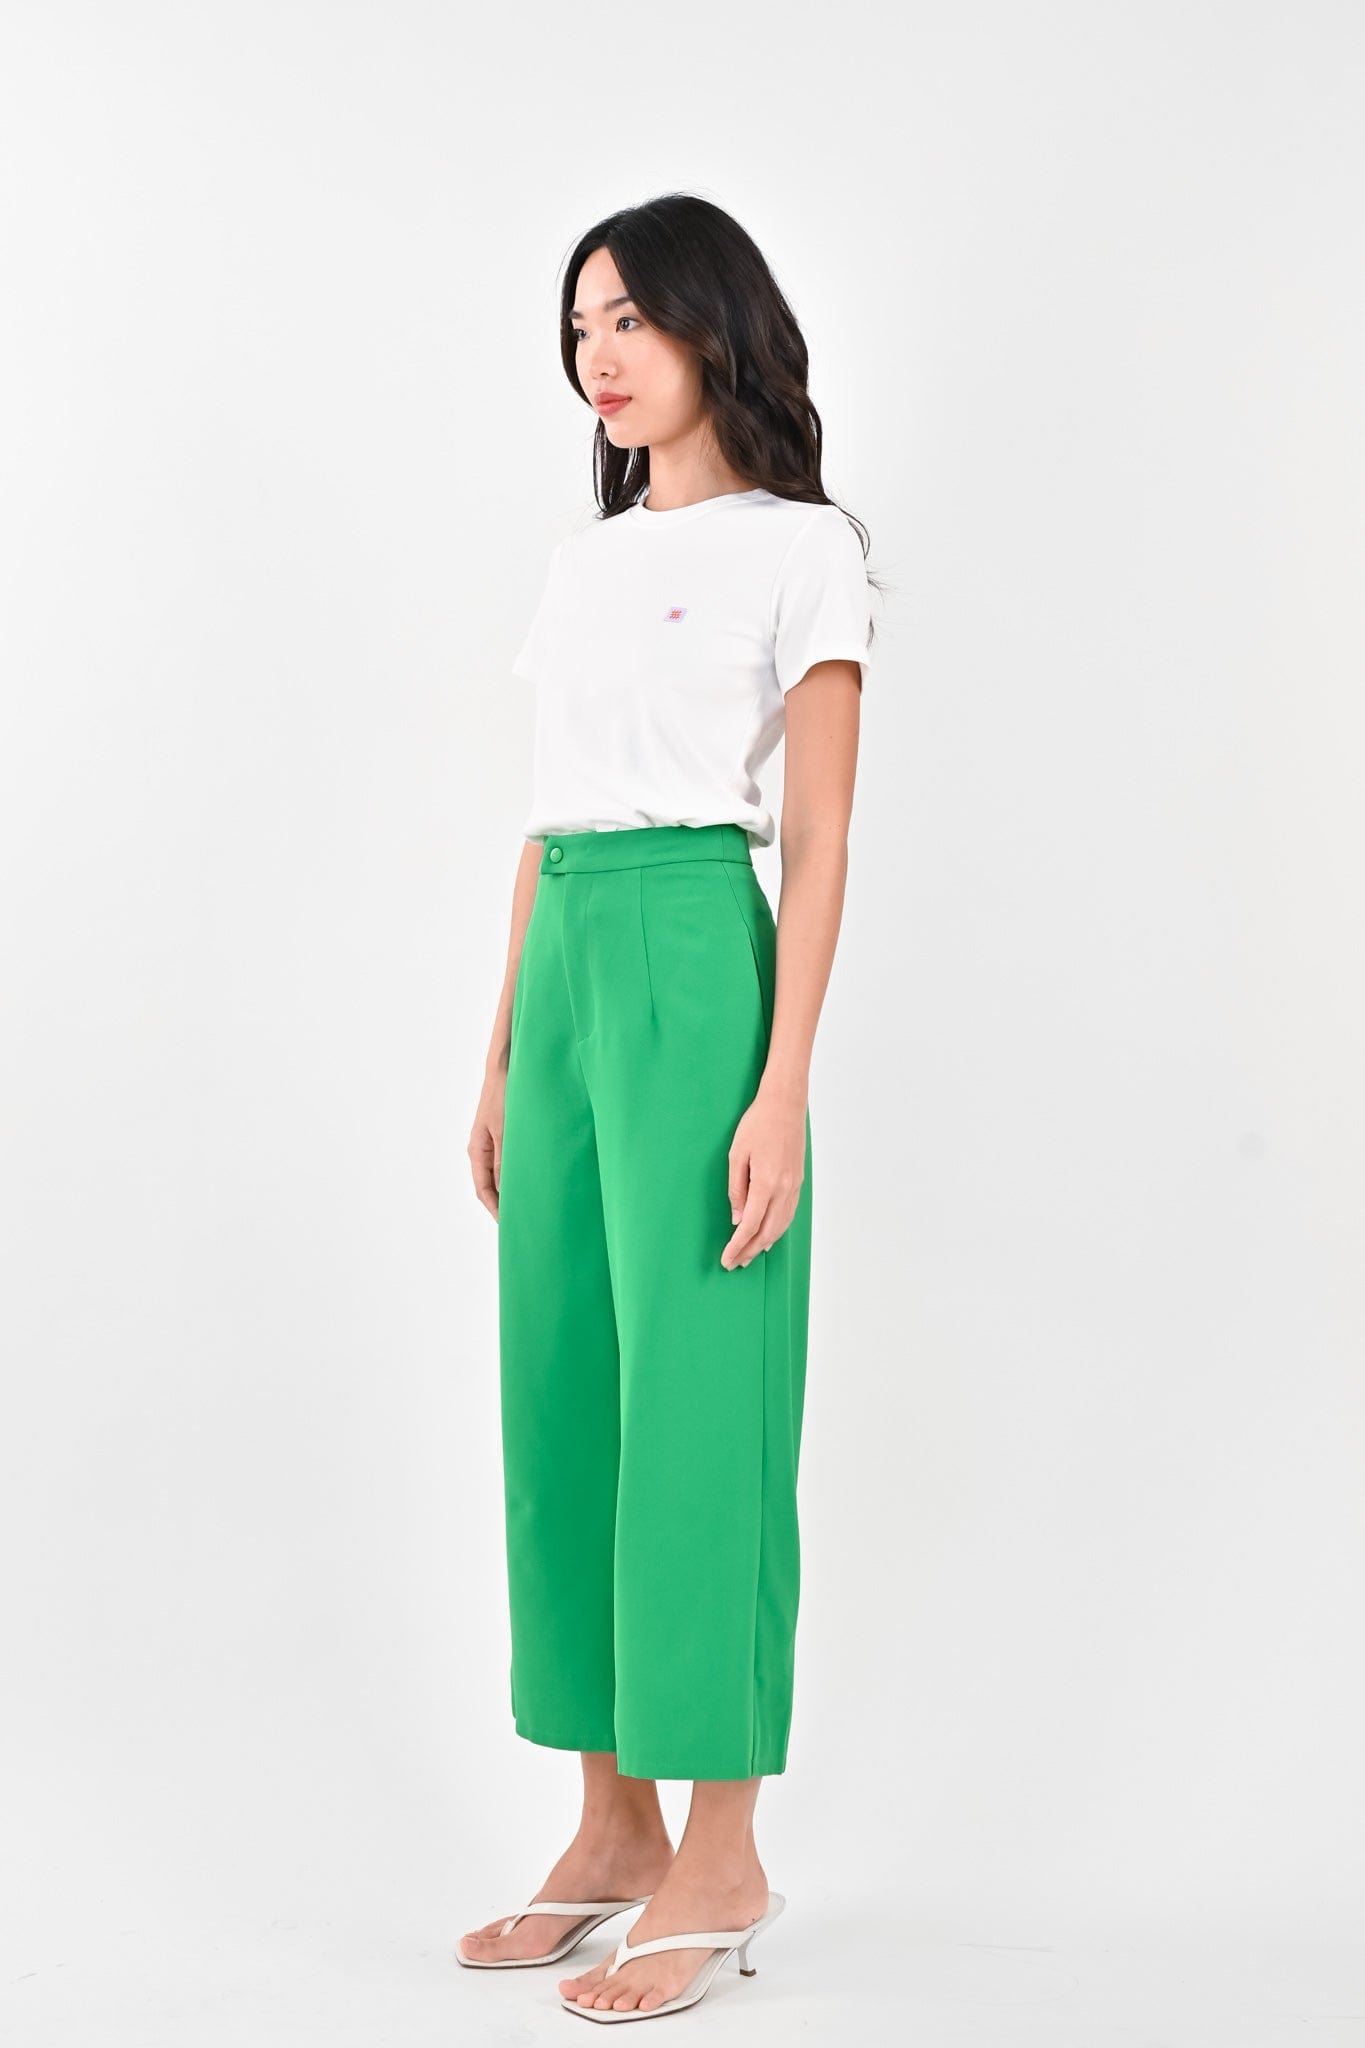 Kelly Green Pleated Pants – Twisted Sisters!